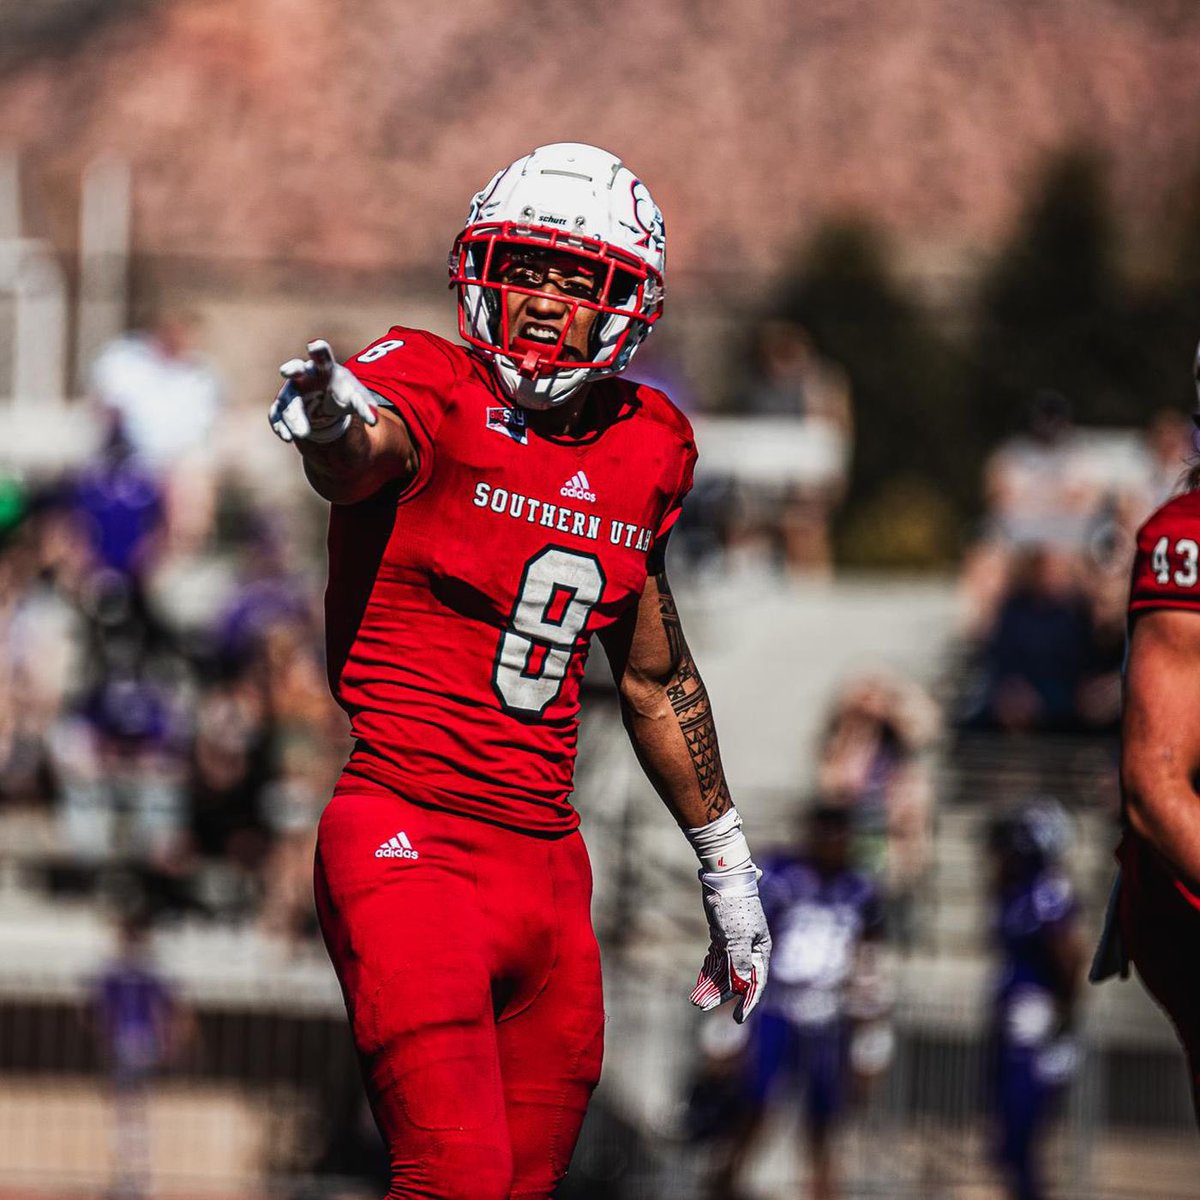 After a great conversation with @OGMacDC I’m blessed to receive a PWO to @SUUFB_!!! Go T-Birds! @cavemanfootball @Trevor_Richins